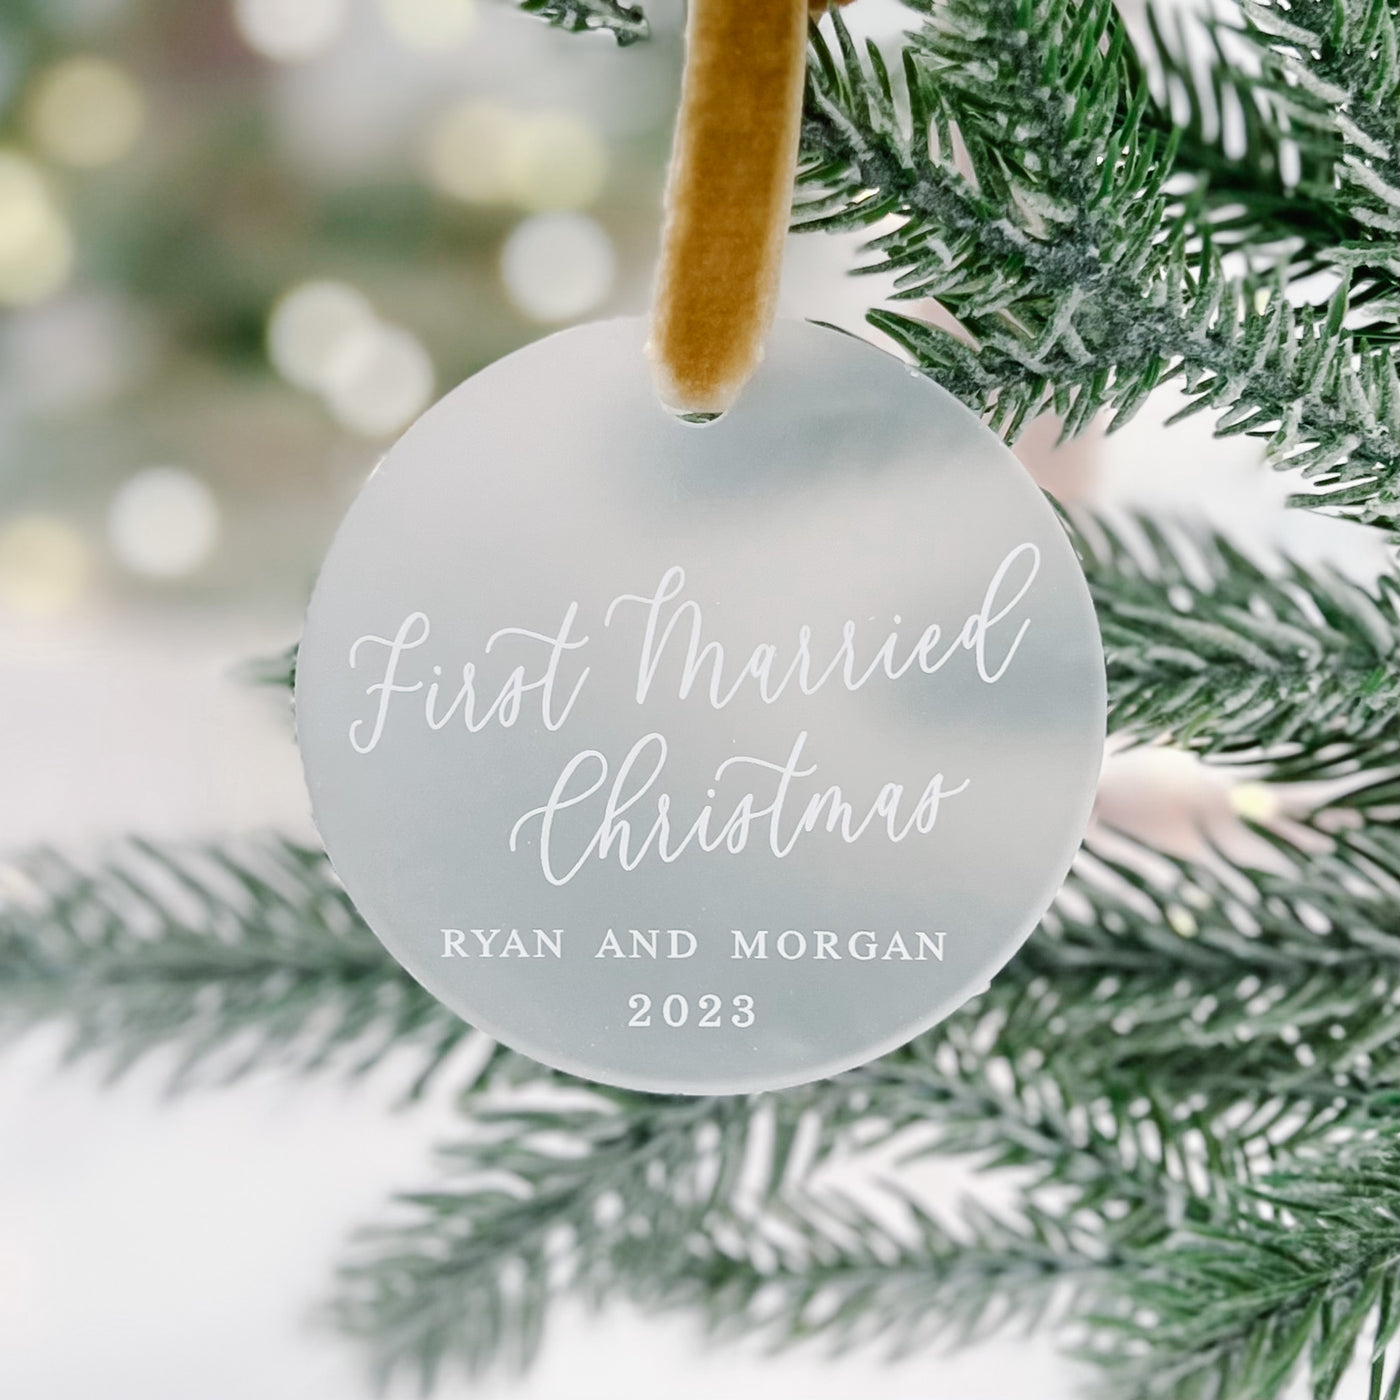 First Married Christmas Ornament - Barn Street Designs